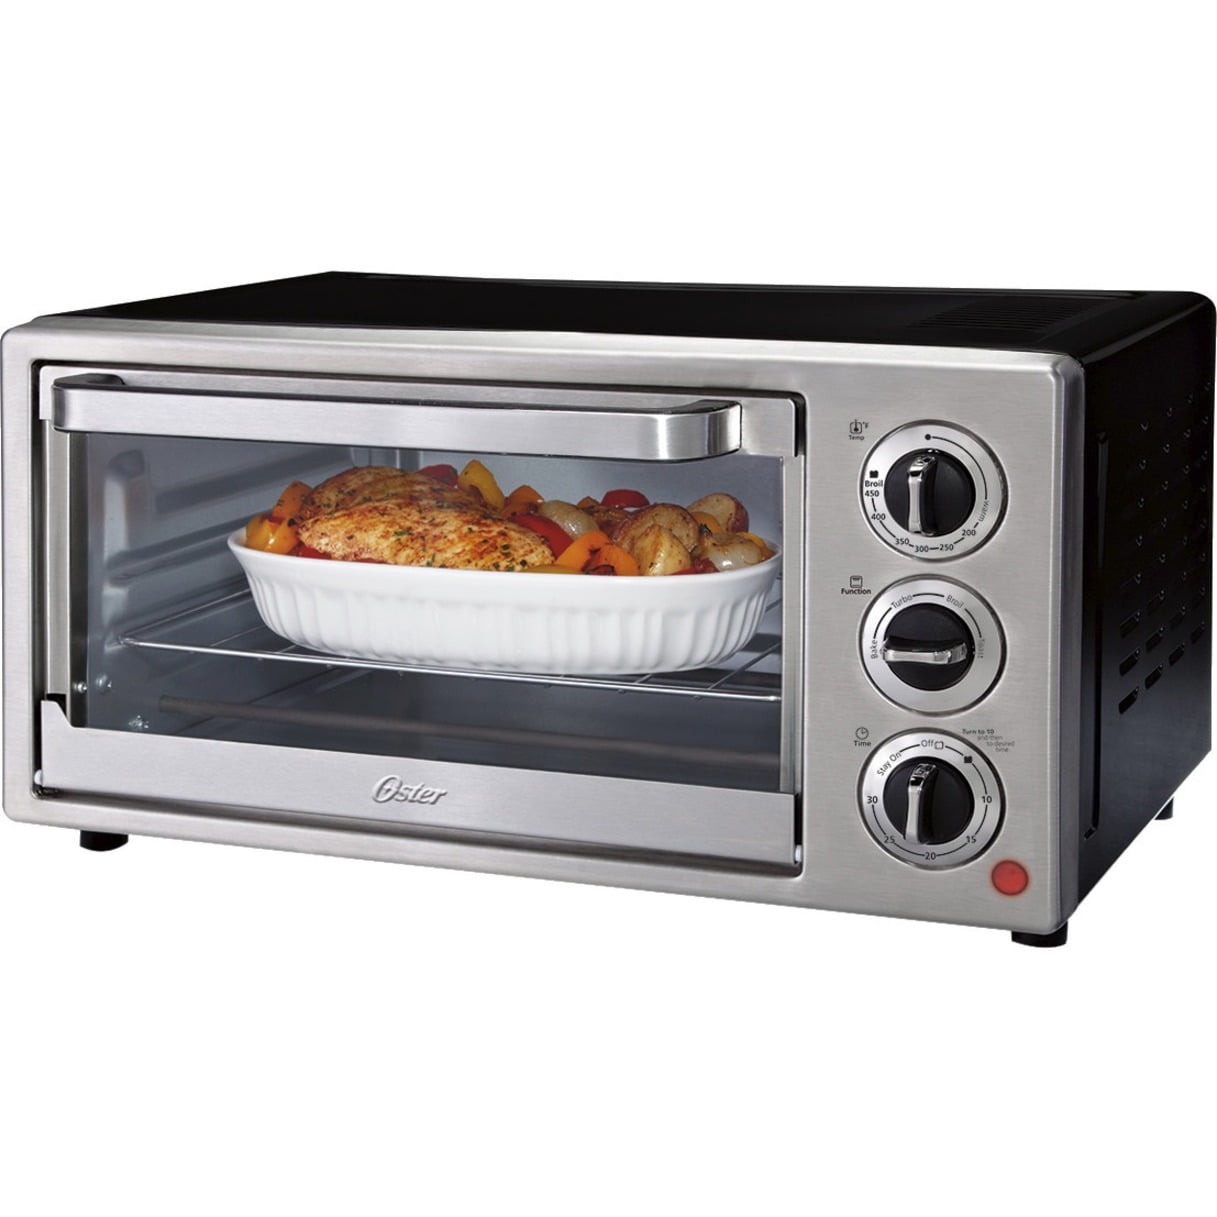 Oster TSSTTVCG04 6-Slice Convection Countertop Oven - Silver for